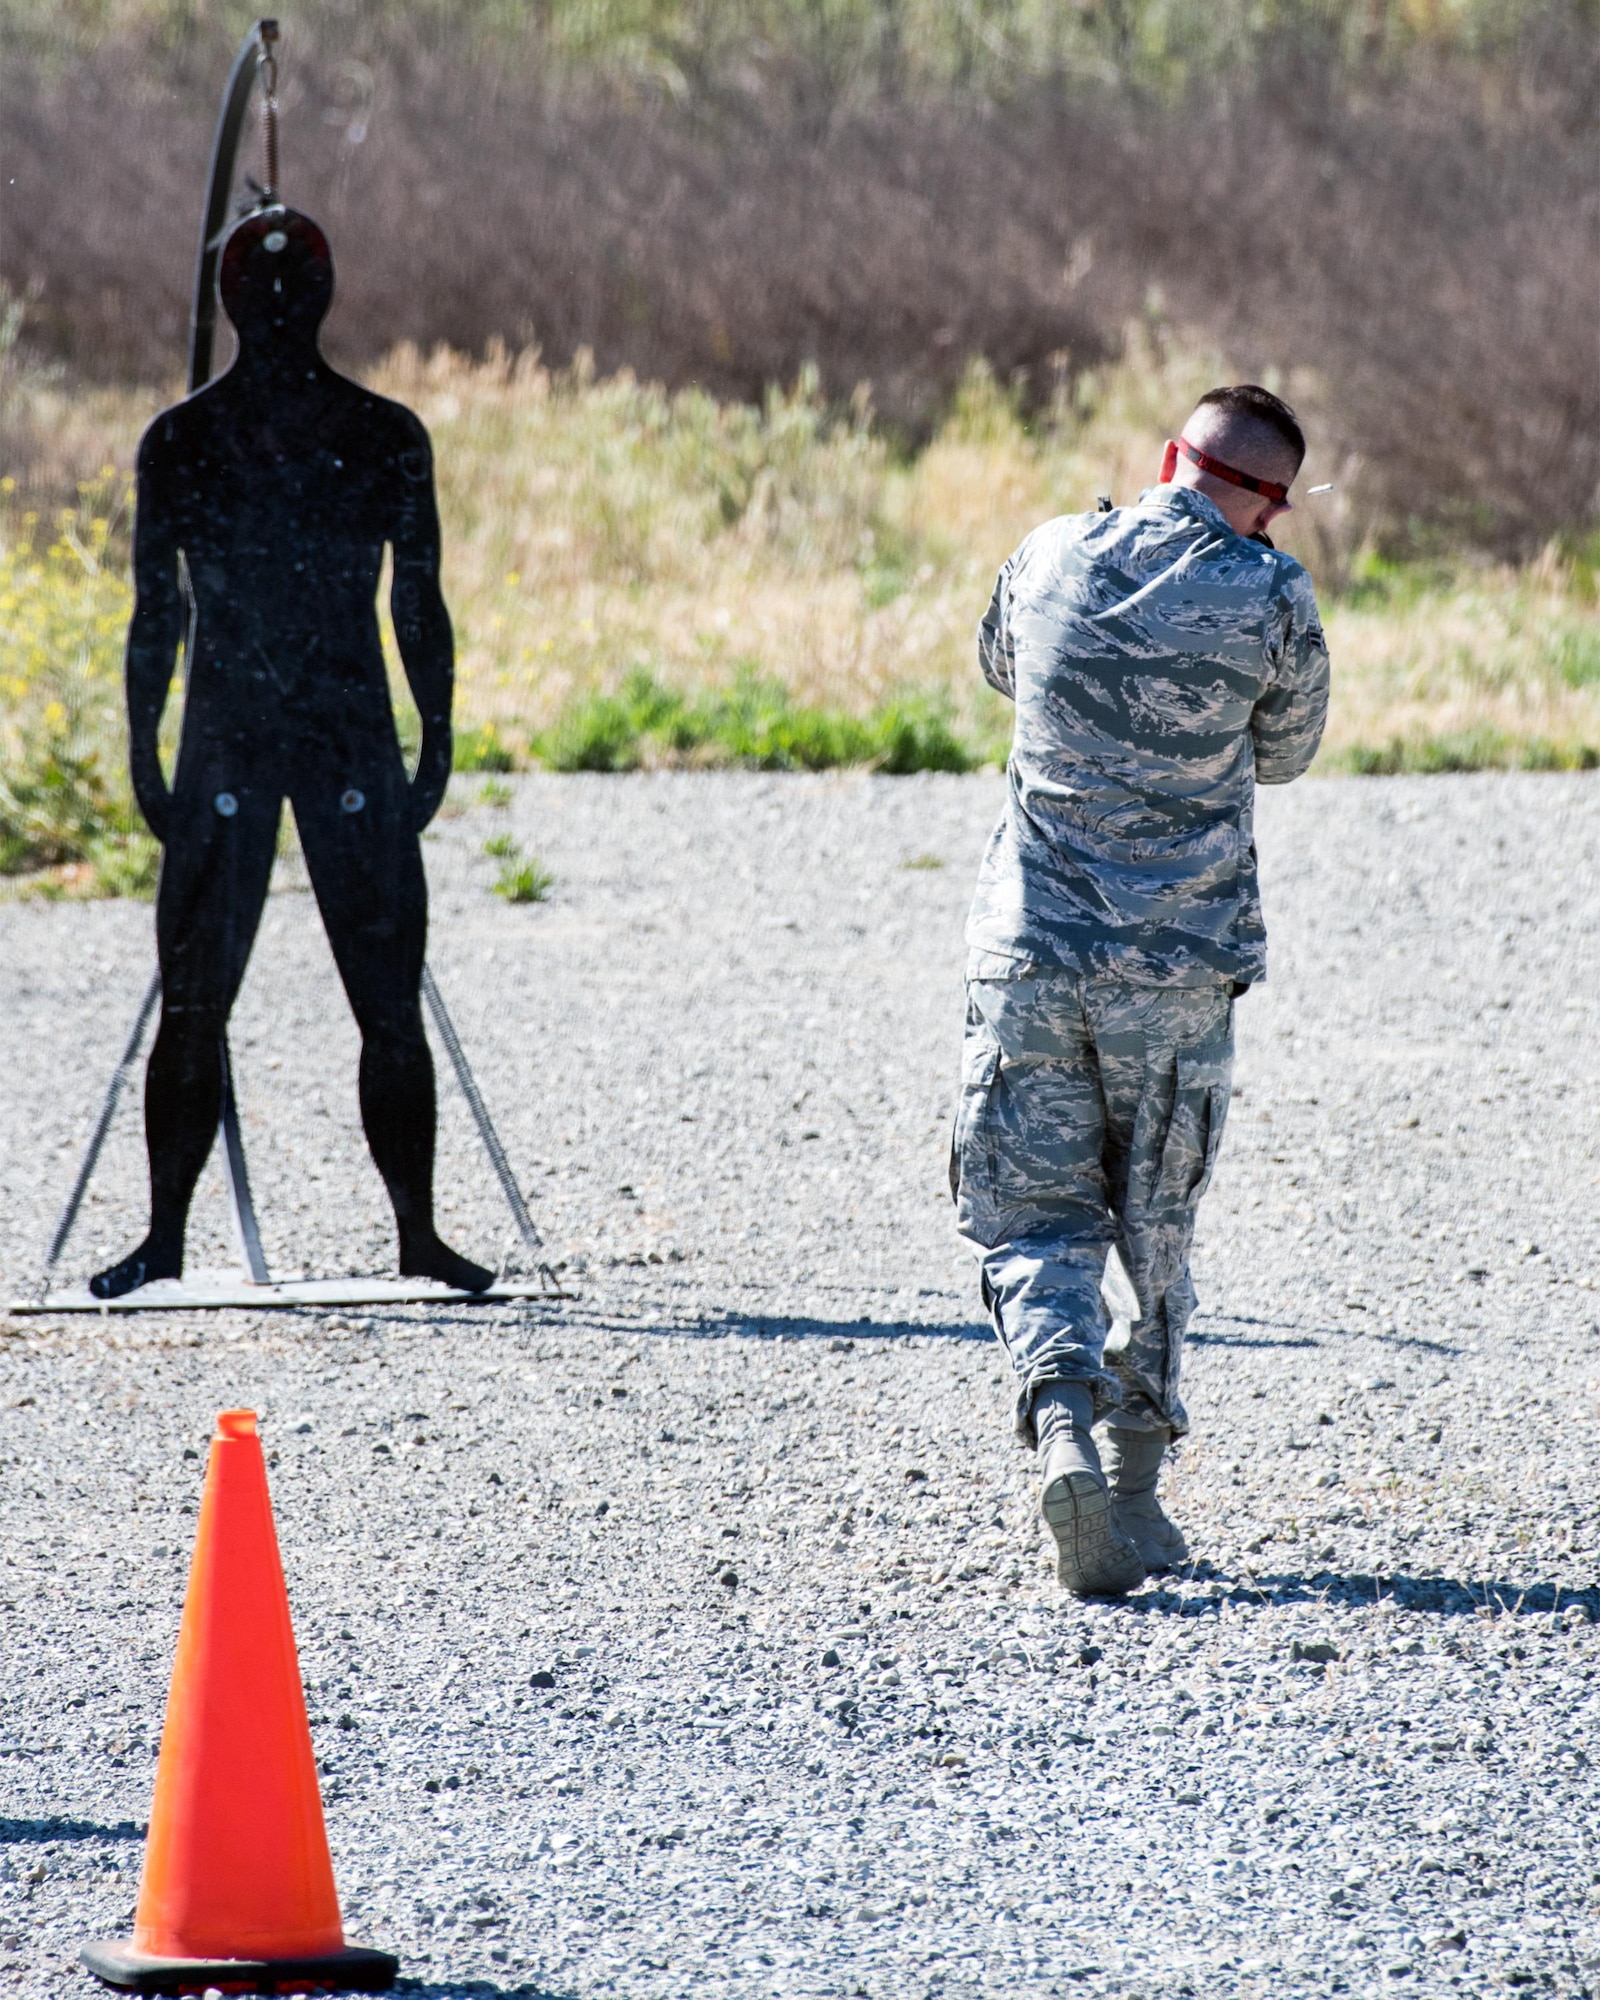 Defenders from the 60th Security Forces Squadron, Travis Air Force Base, Calif., compete in a shooting competition May 18, 2017. The competition was one of several events sponsored by the squadron in honor of Police Week. (U.S. Air Force photo by Louis Briscese)